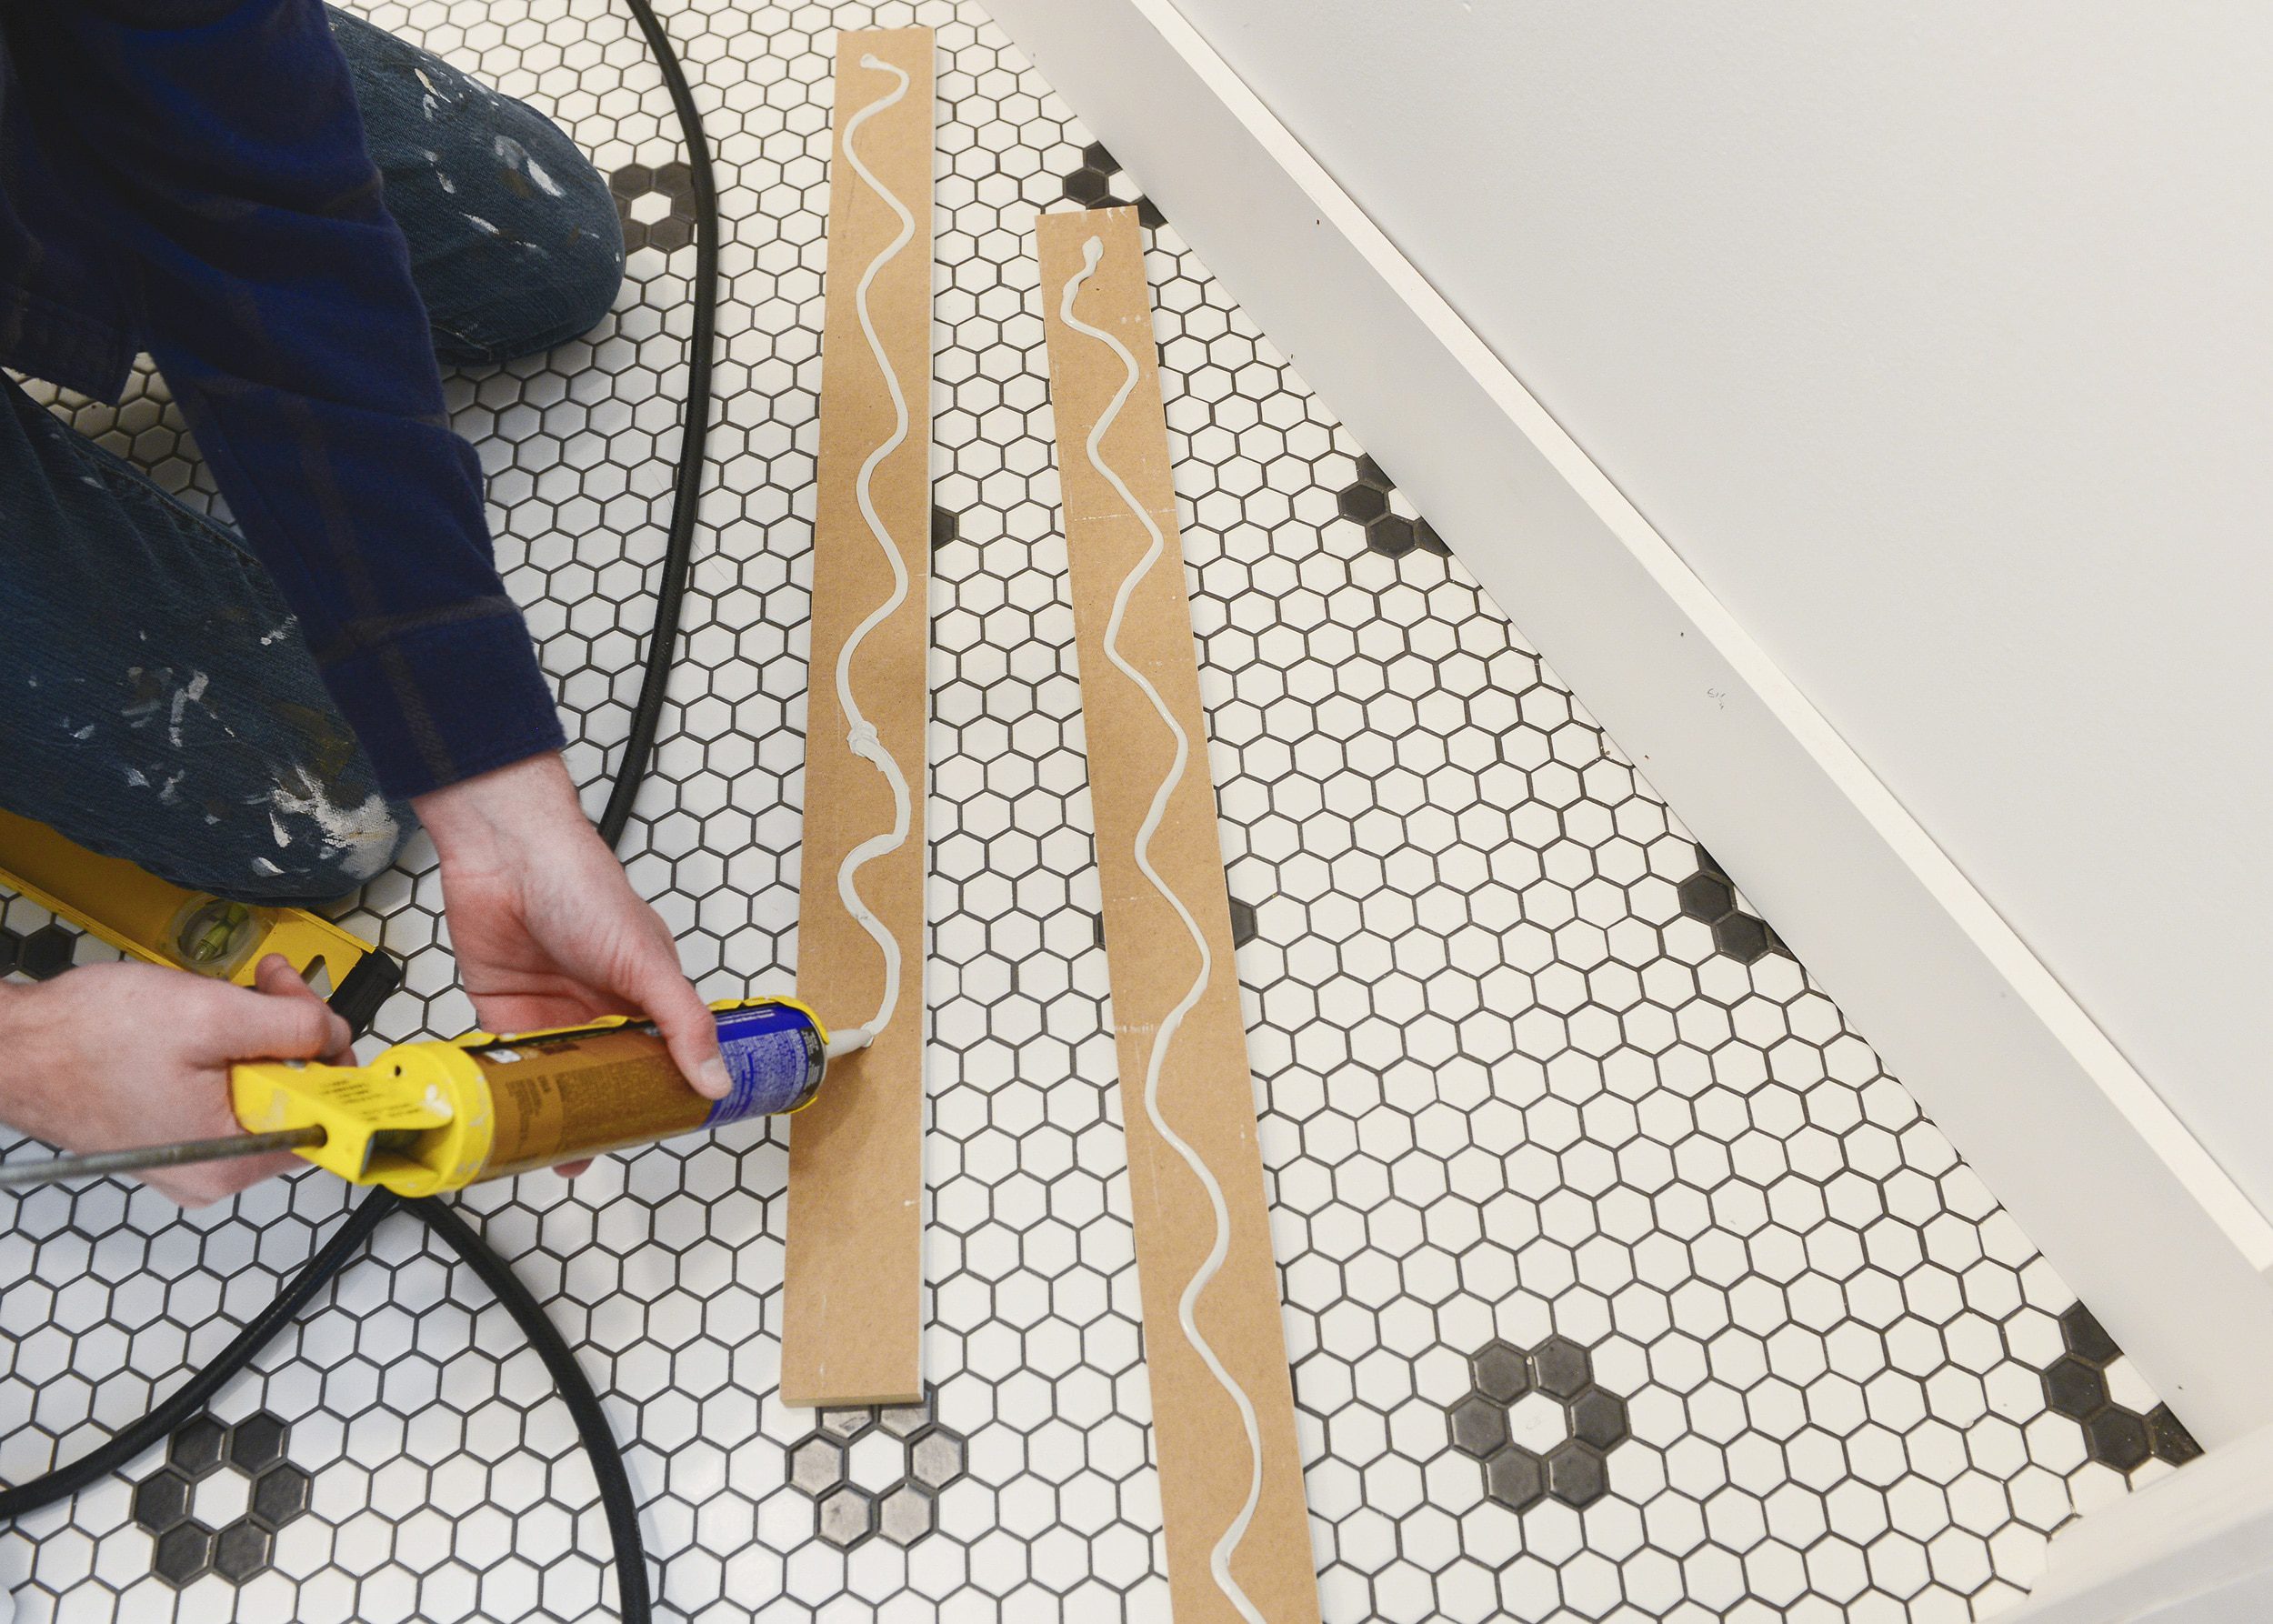 How to DIY board and batten wall treatment // via Yellow Brick Home